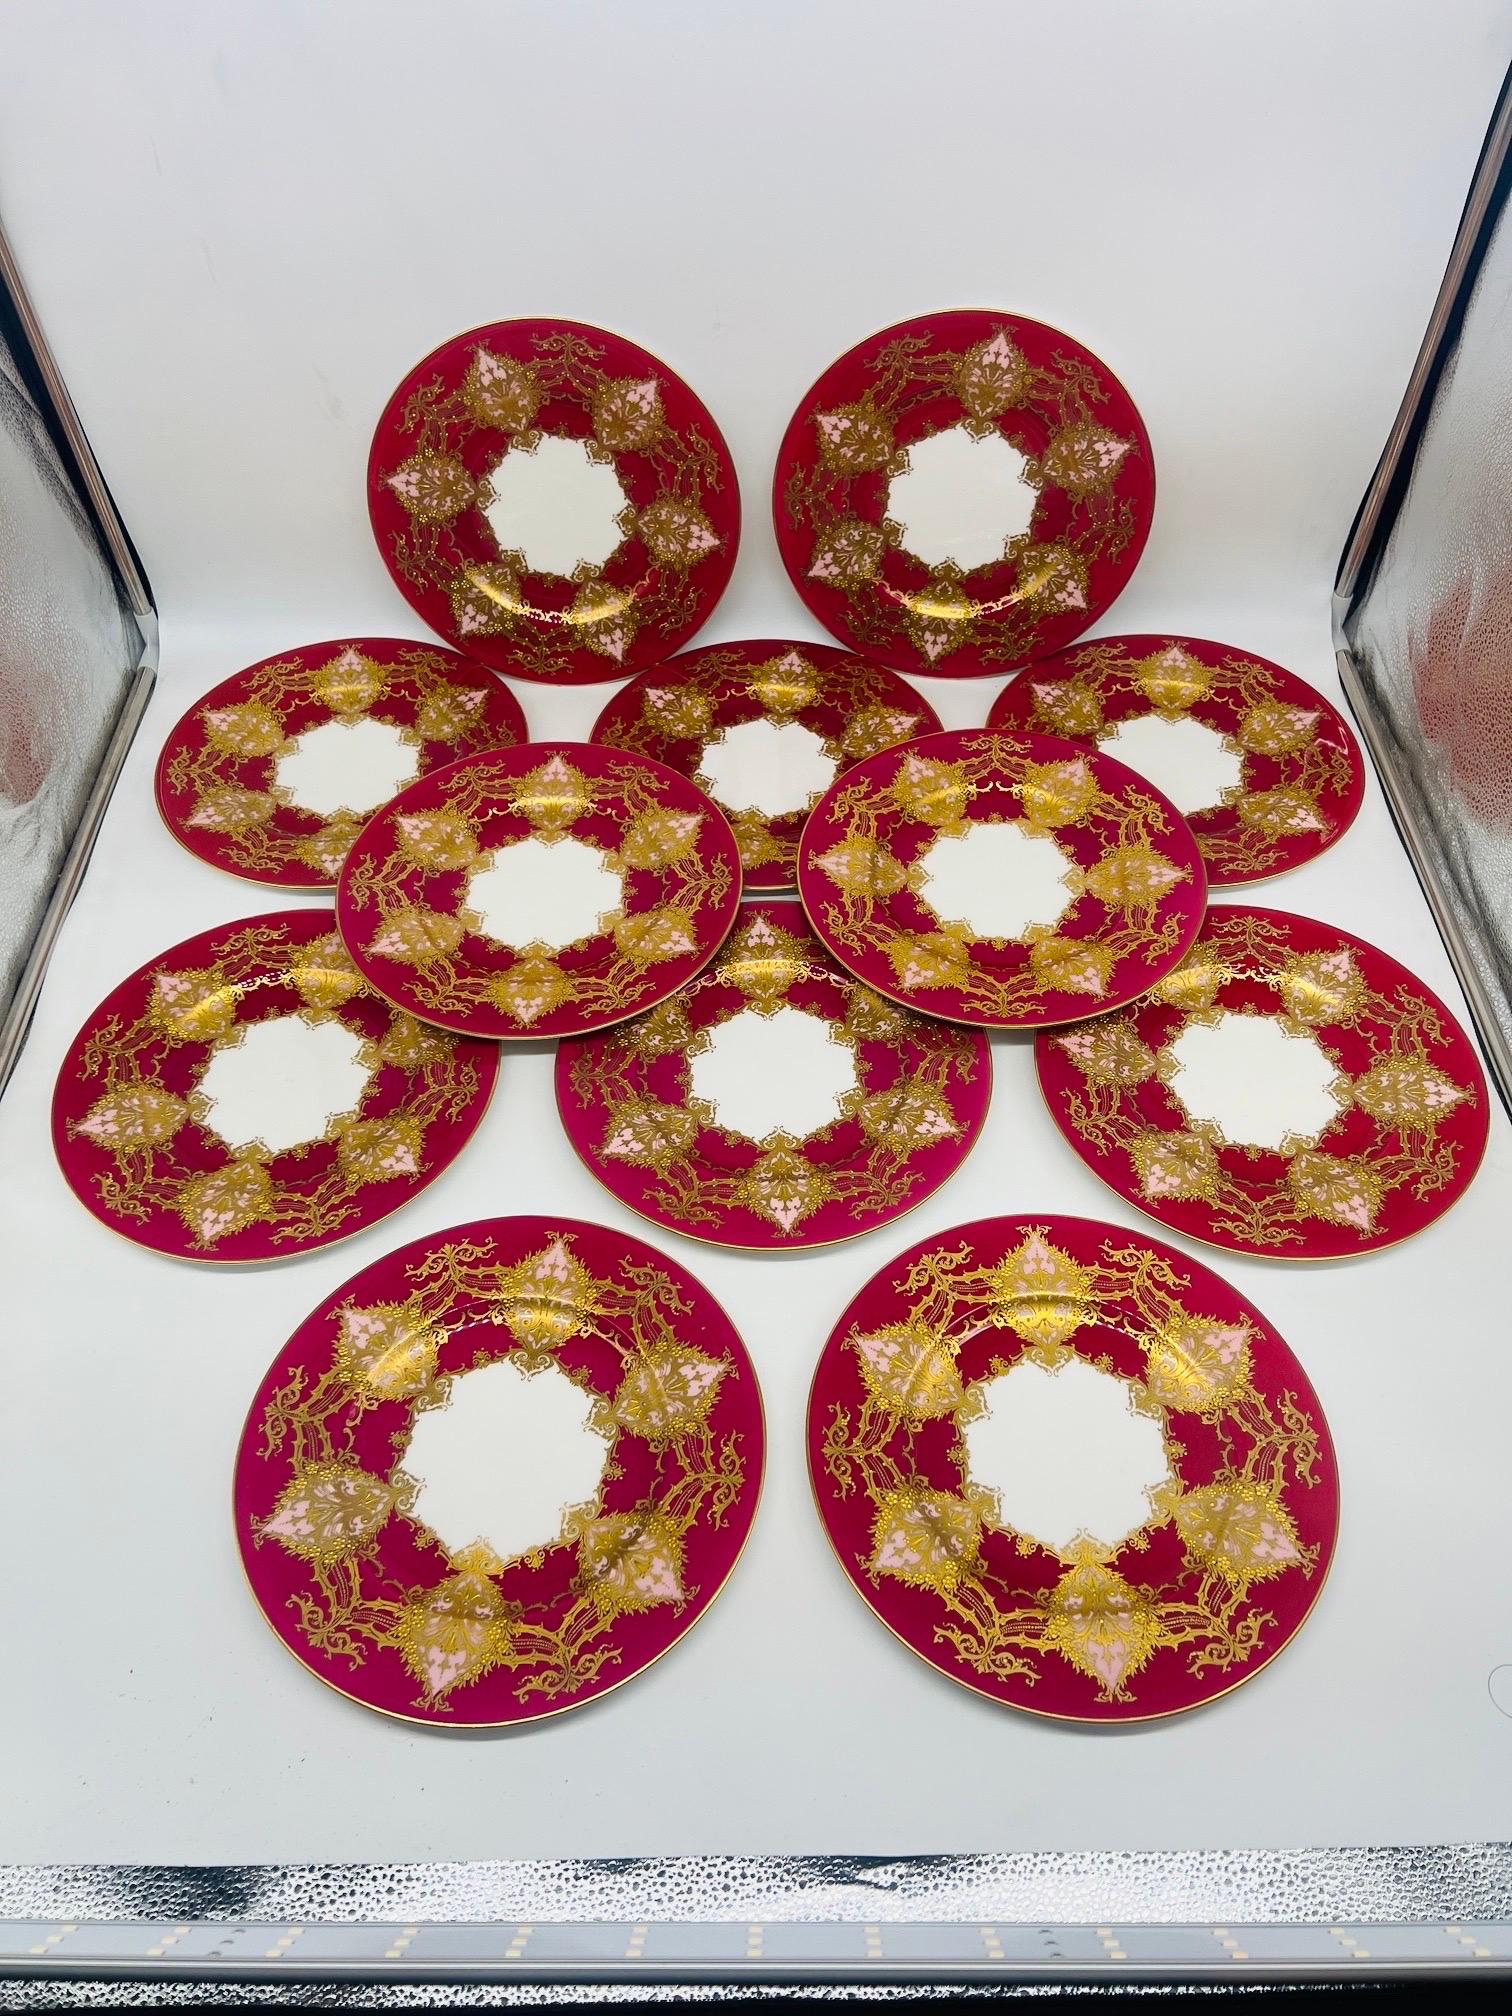 Set of 12 Royal Worcester Two- Tone Heavily Raised Gilt Decorated Dinner Plates.

Each plate intricately decorated with raised jeweled gilding accenting the fine 6 pink tone windows presented across the surface of the magenta base. The thorn vines